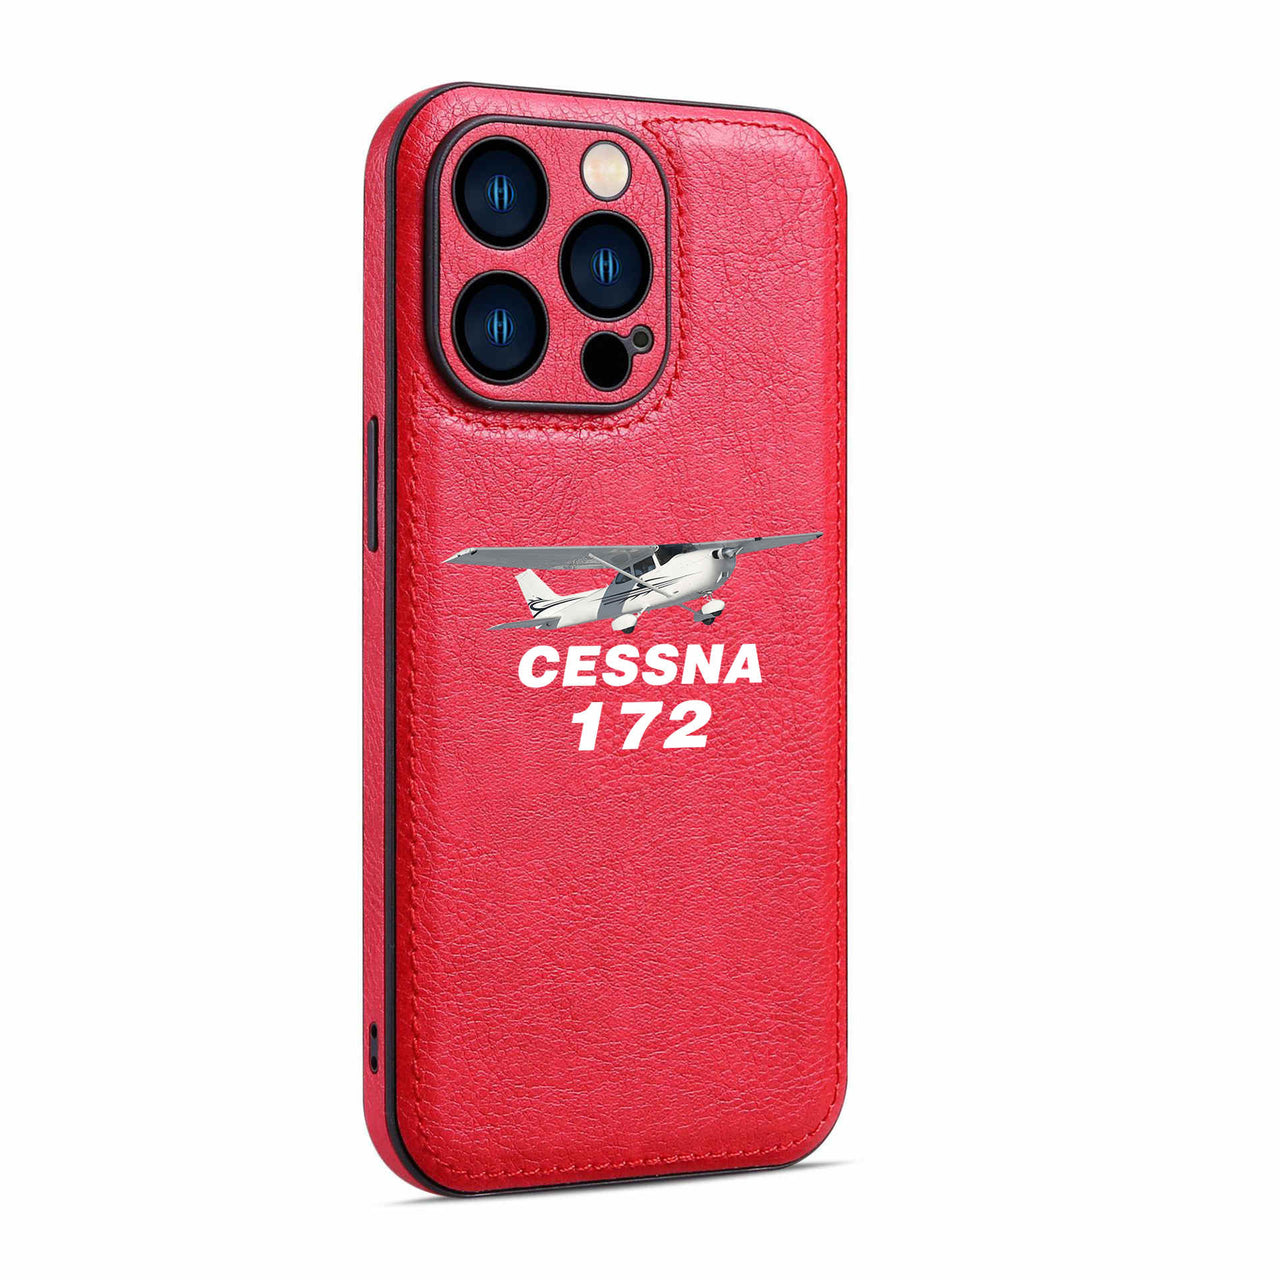 The Cessna 172 Designed Leather iPhone Cases